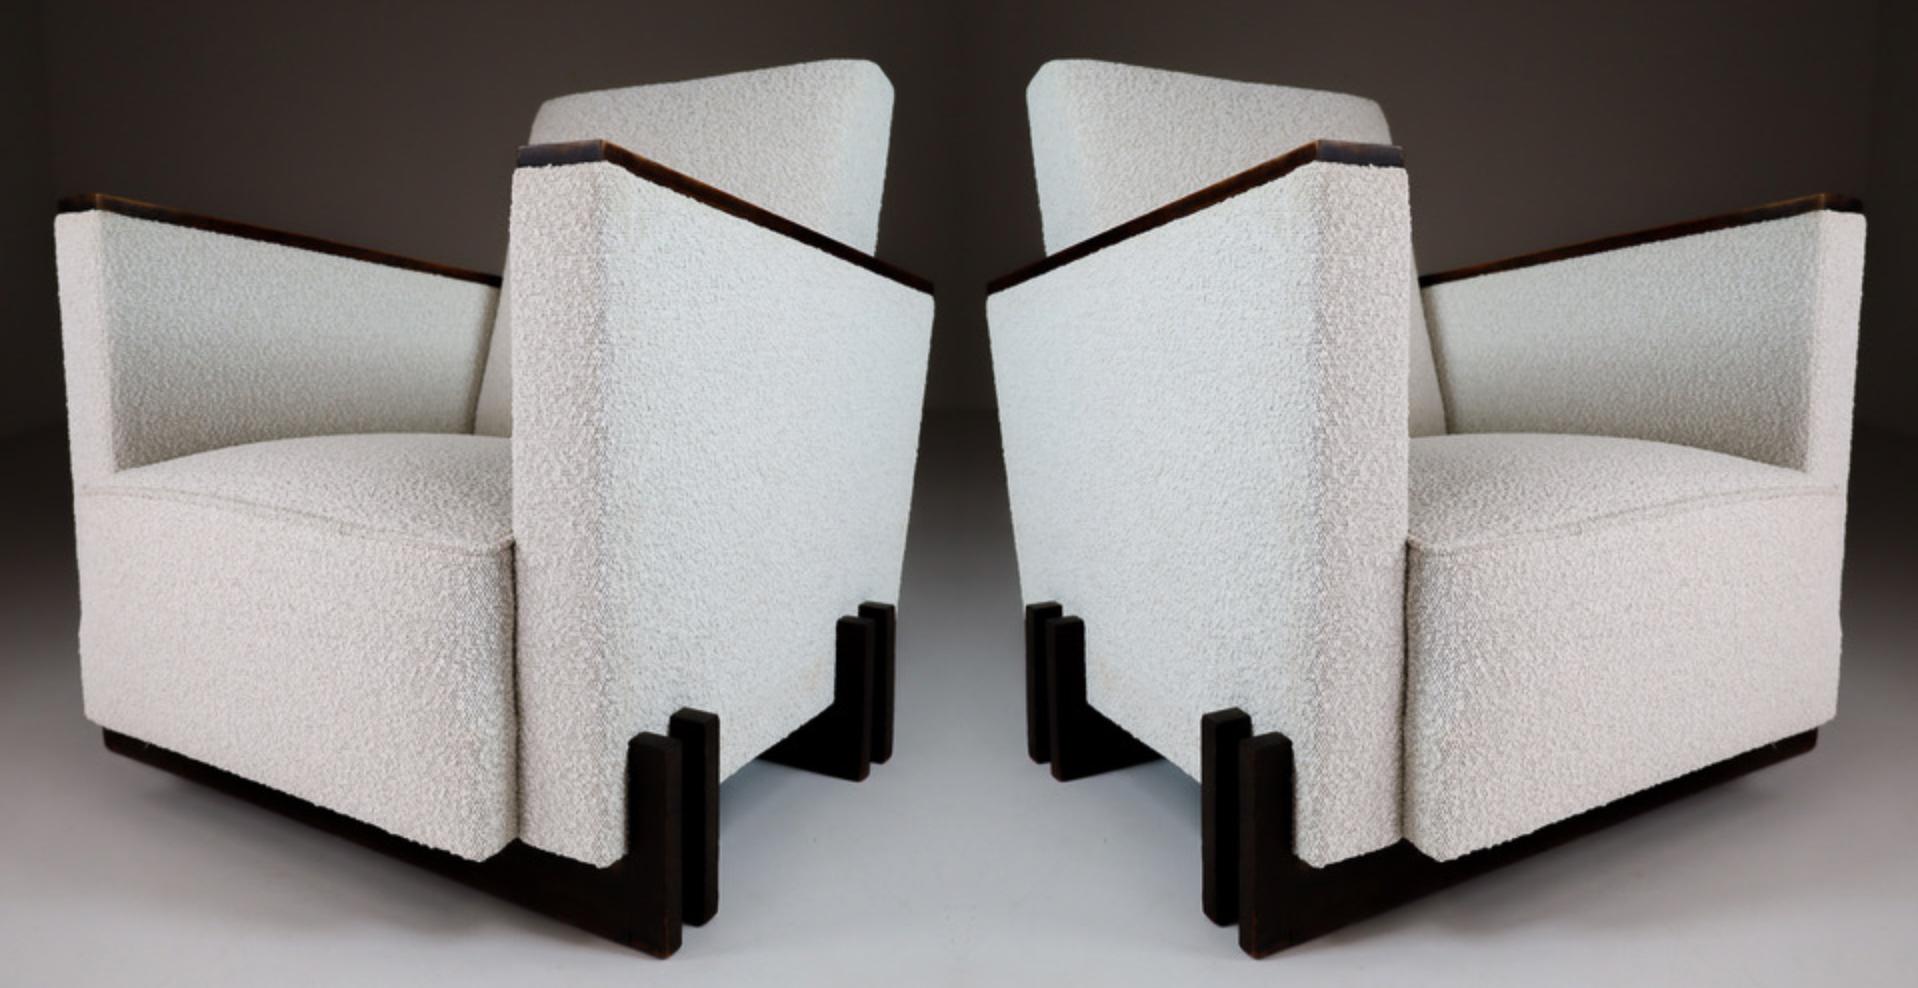 Pair of two Art-Deco lounge / arm chairs, in patinated wood and Re-upholstered Boucle wool fabric, France, 1930s. These armchairs would make an eye-catching addition to any interior such as living room, family room, screening room or even in the